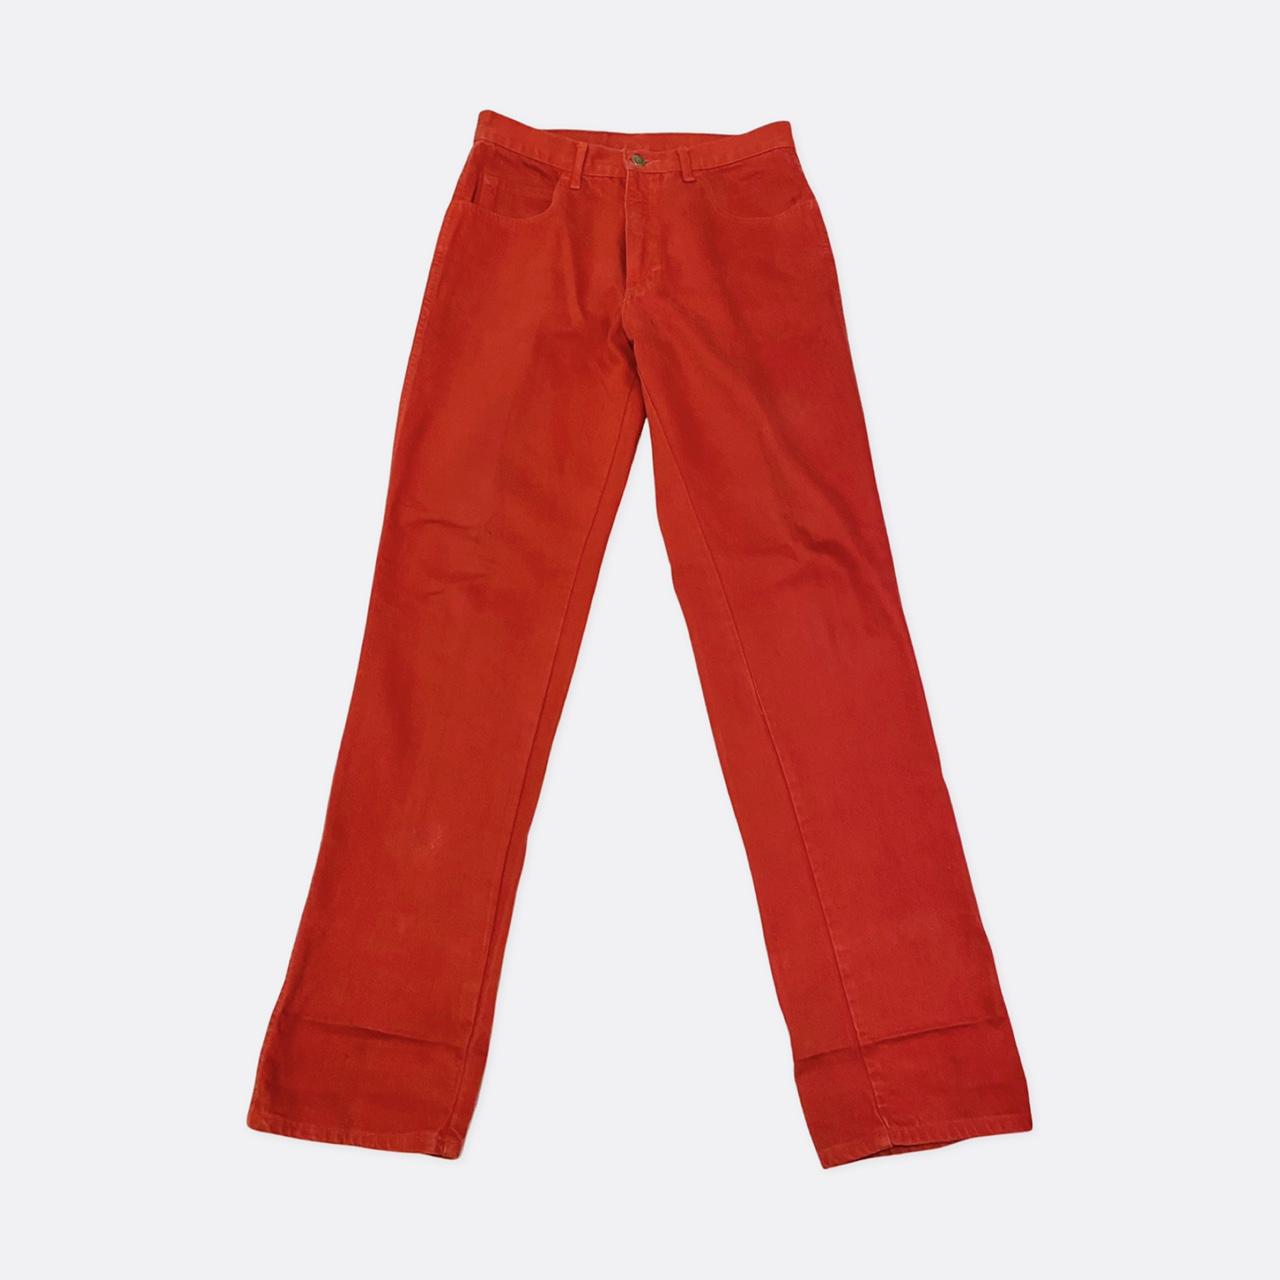 Fantastic Bright Red Vintage Calvins! These are... - Depop